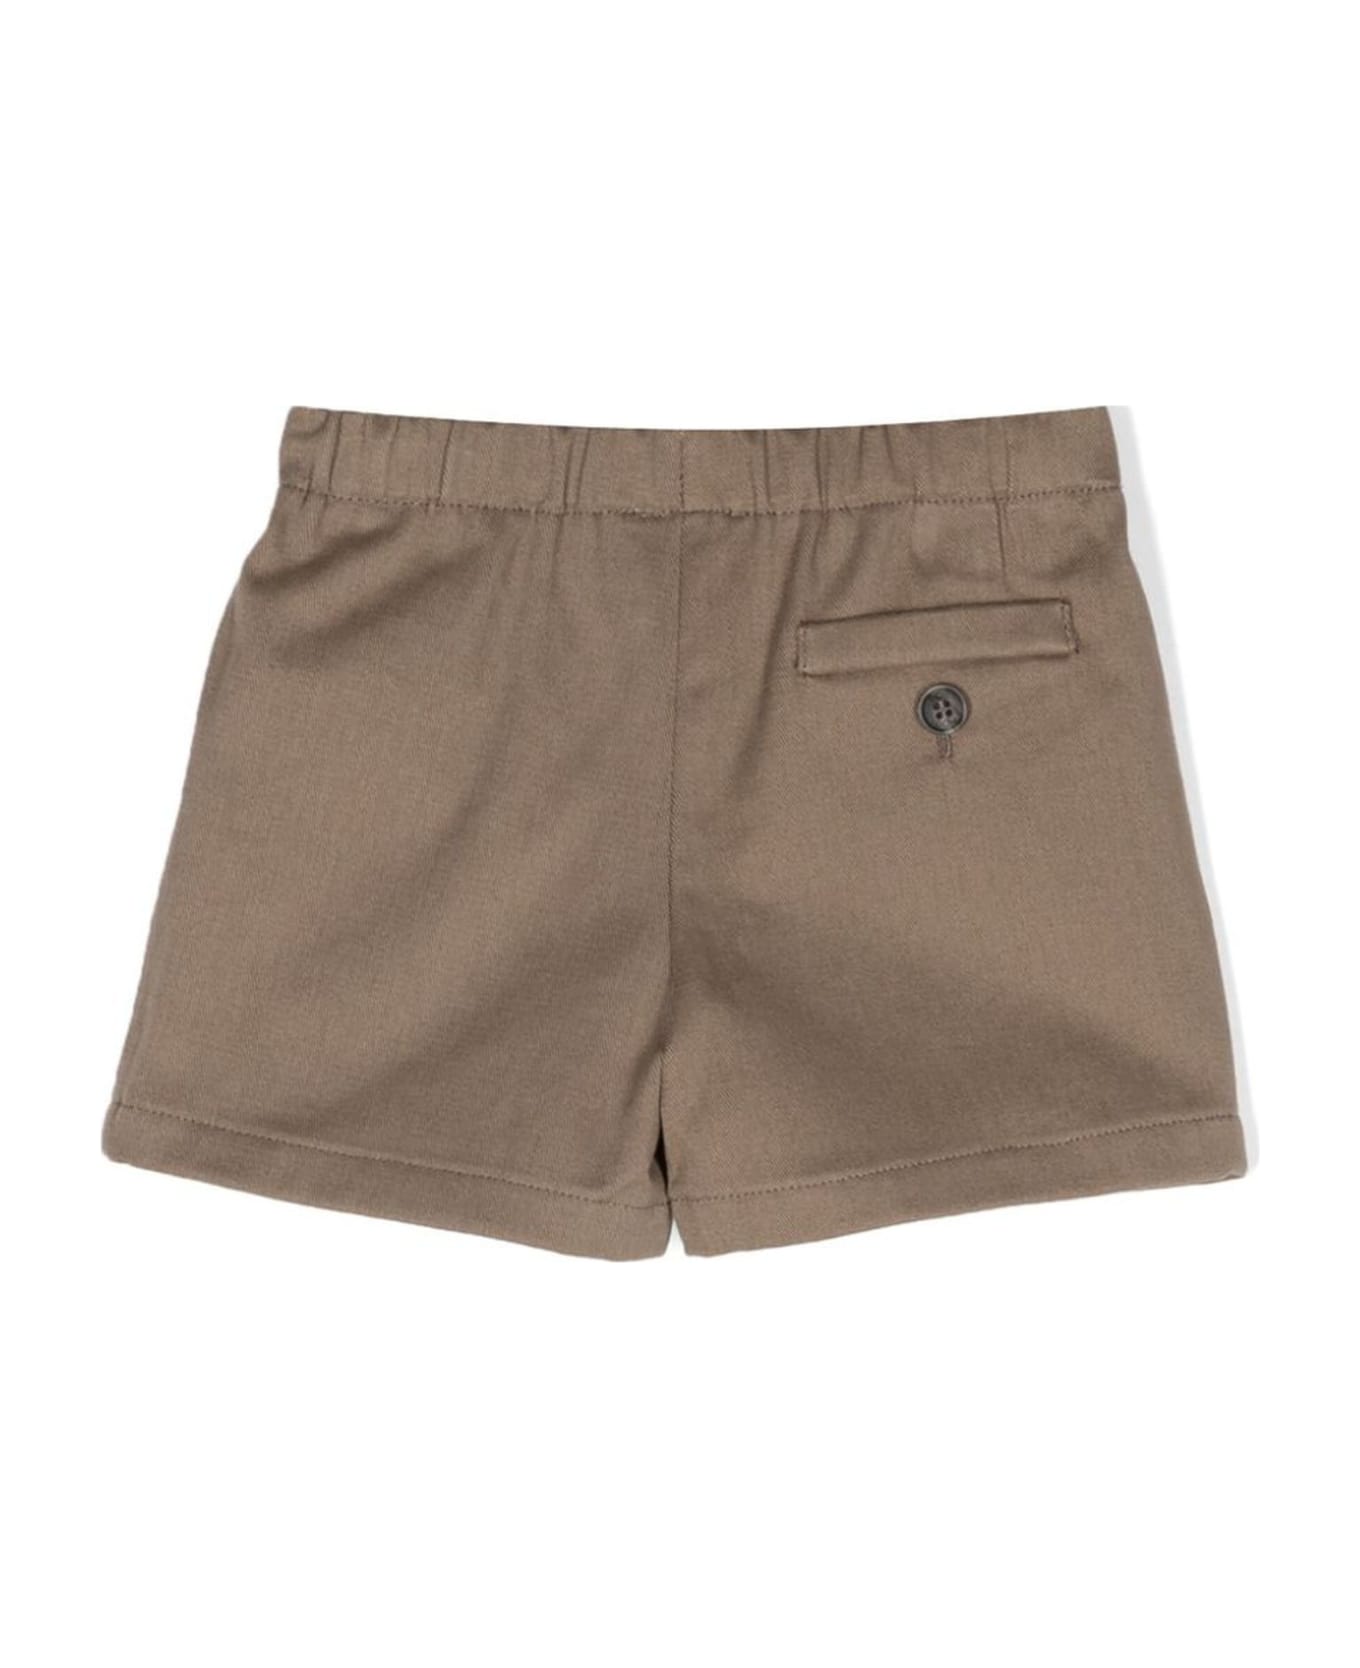 Douuod Shorts Brown - Brown ボトムス